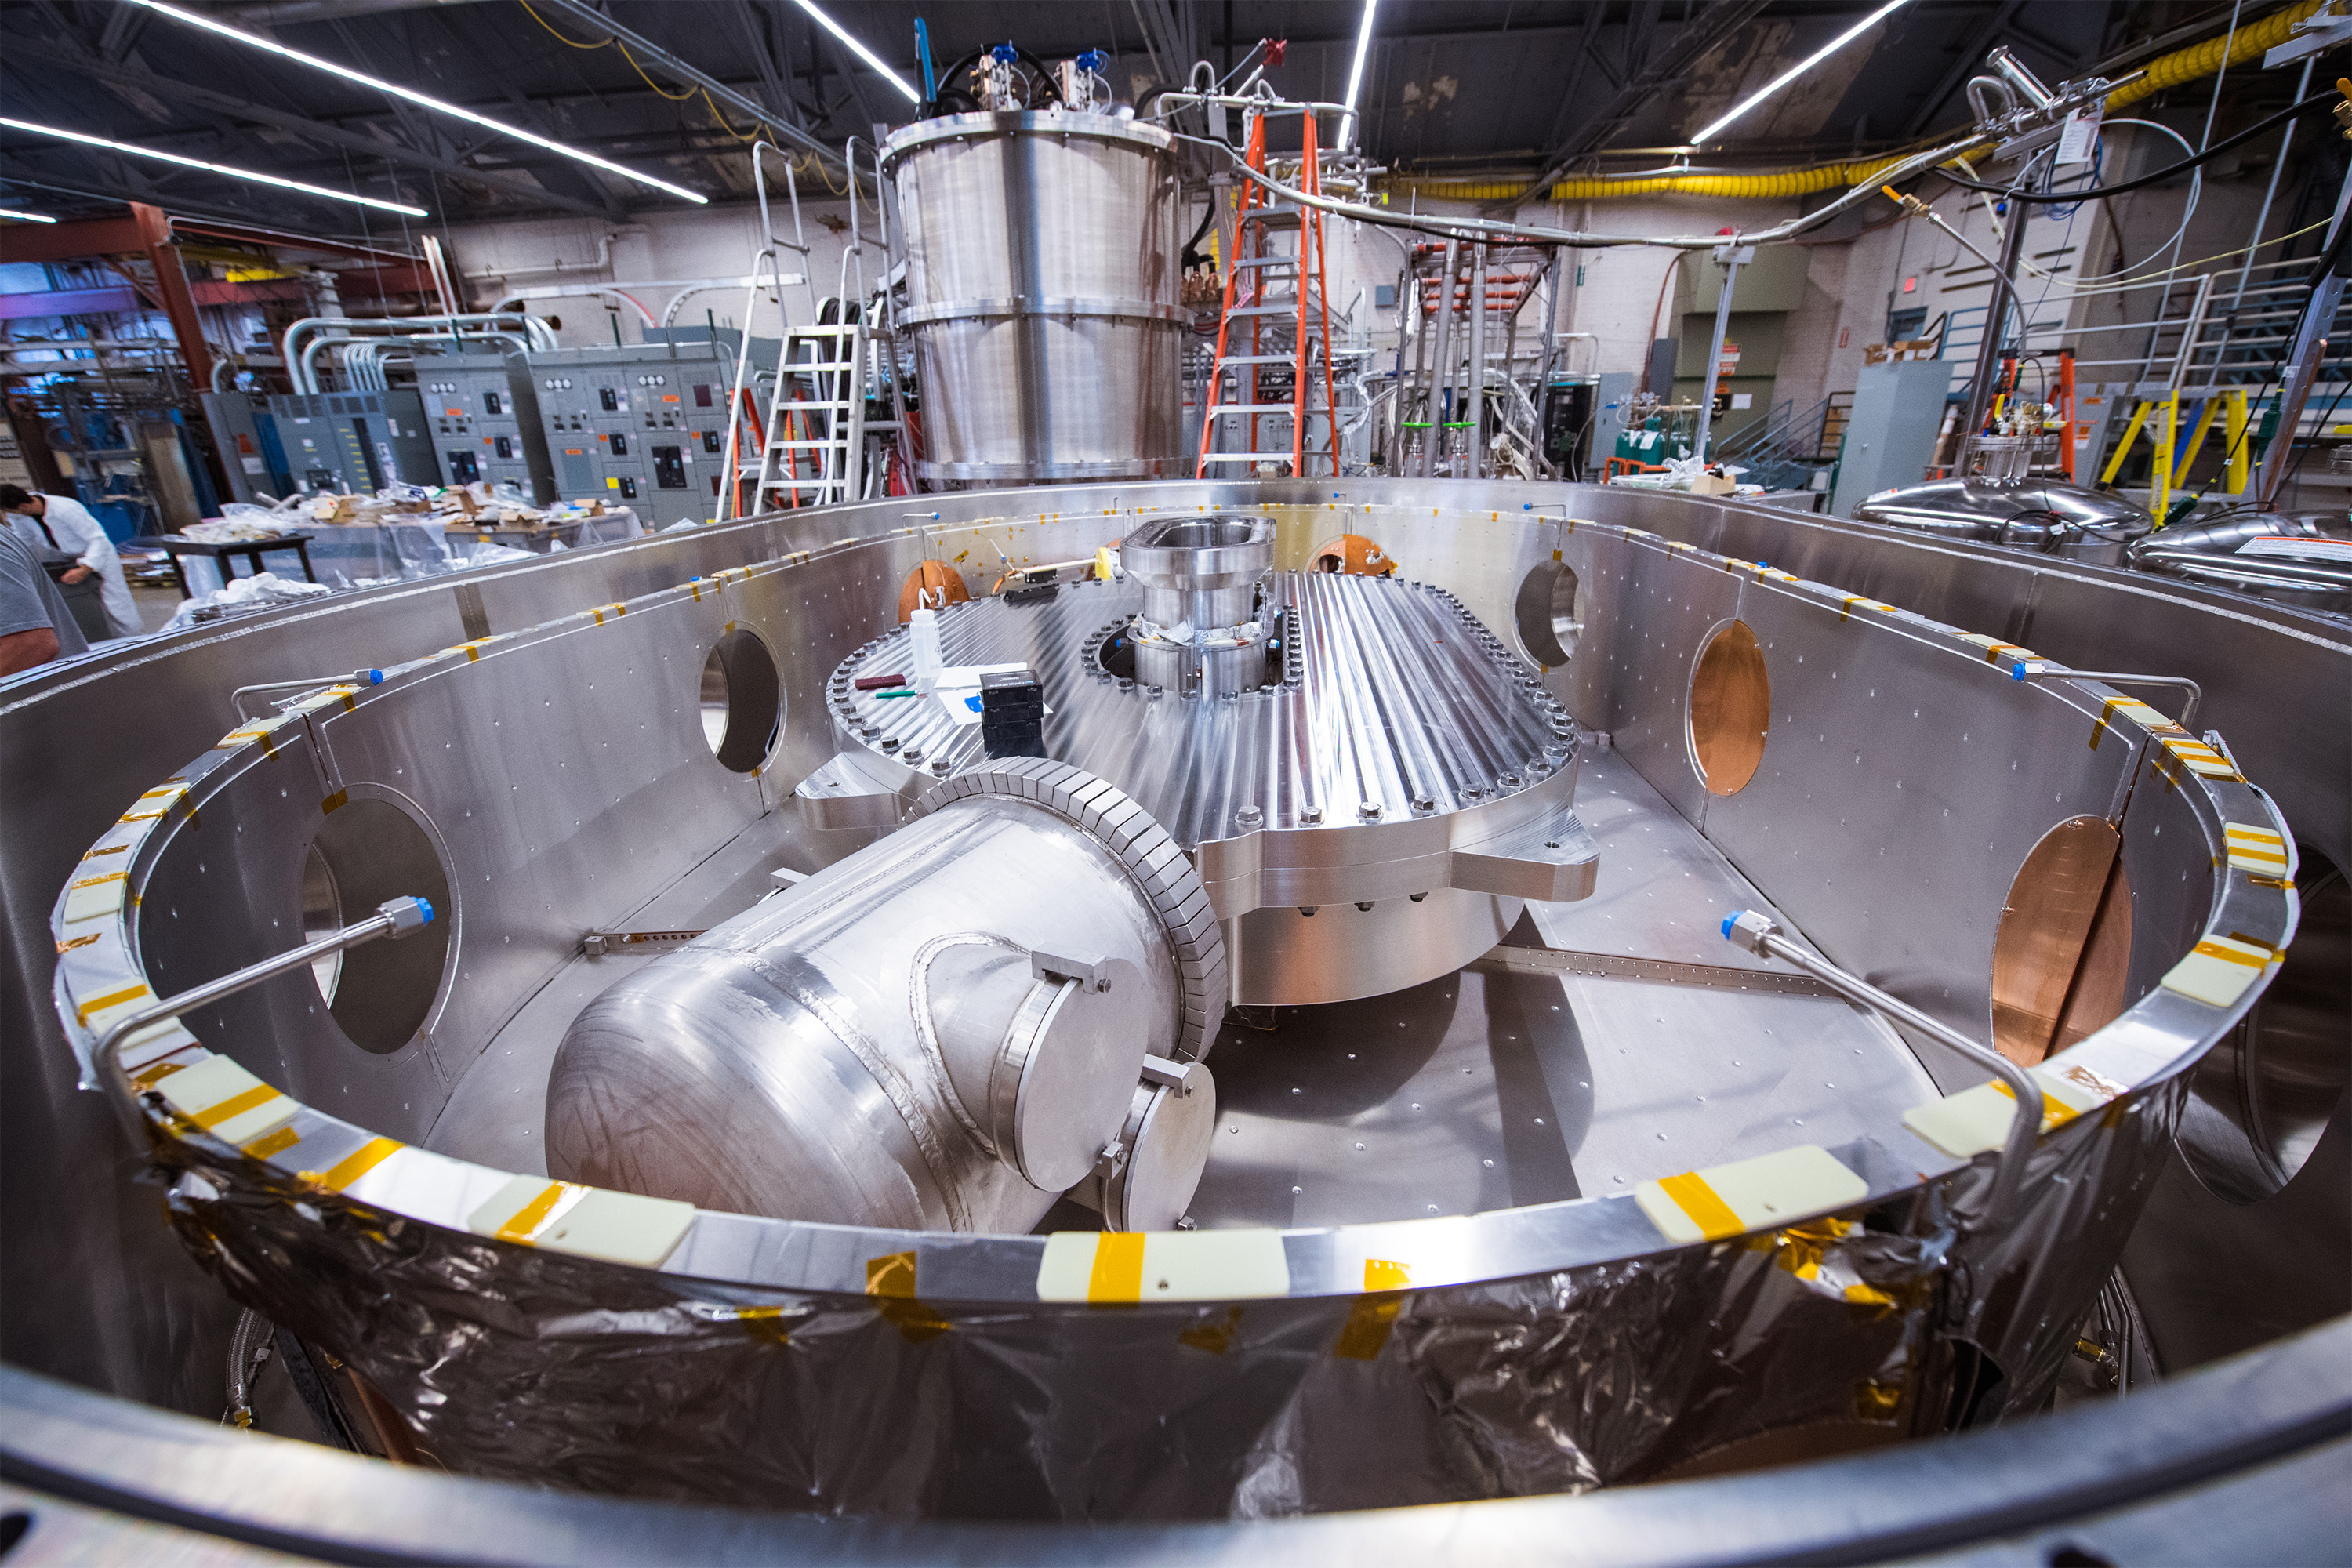 d-shaped high-temperature superconducting magnet inside an oval cryostat which is part of a magnet test stand in a lab at MIT